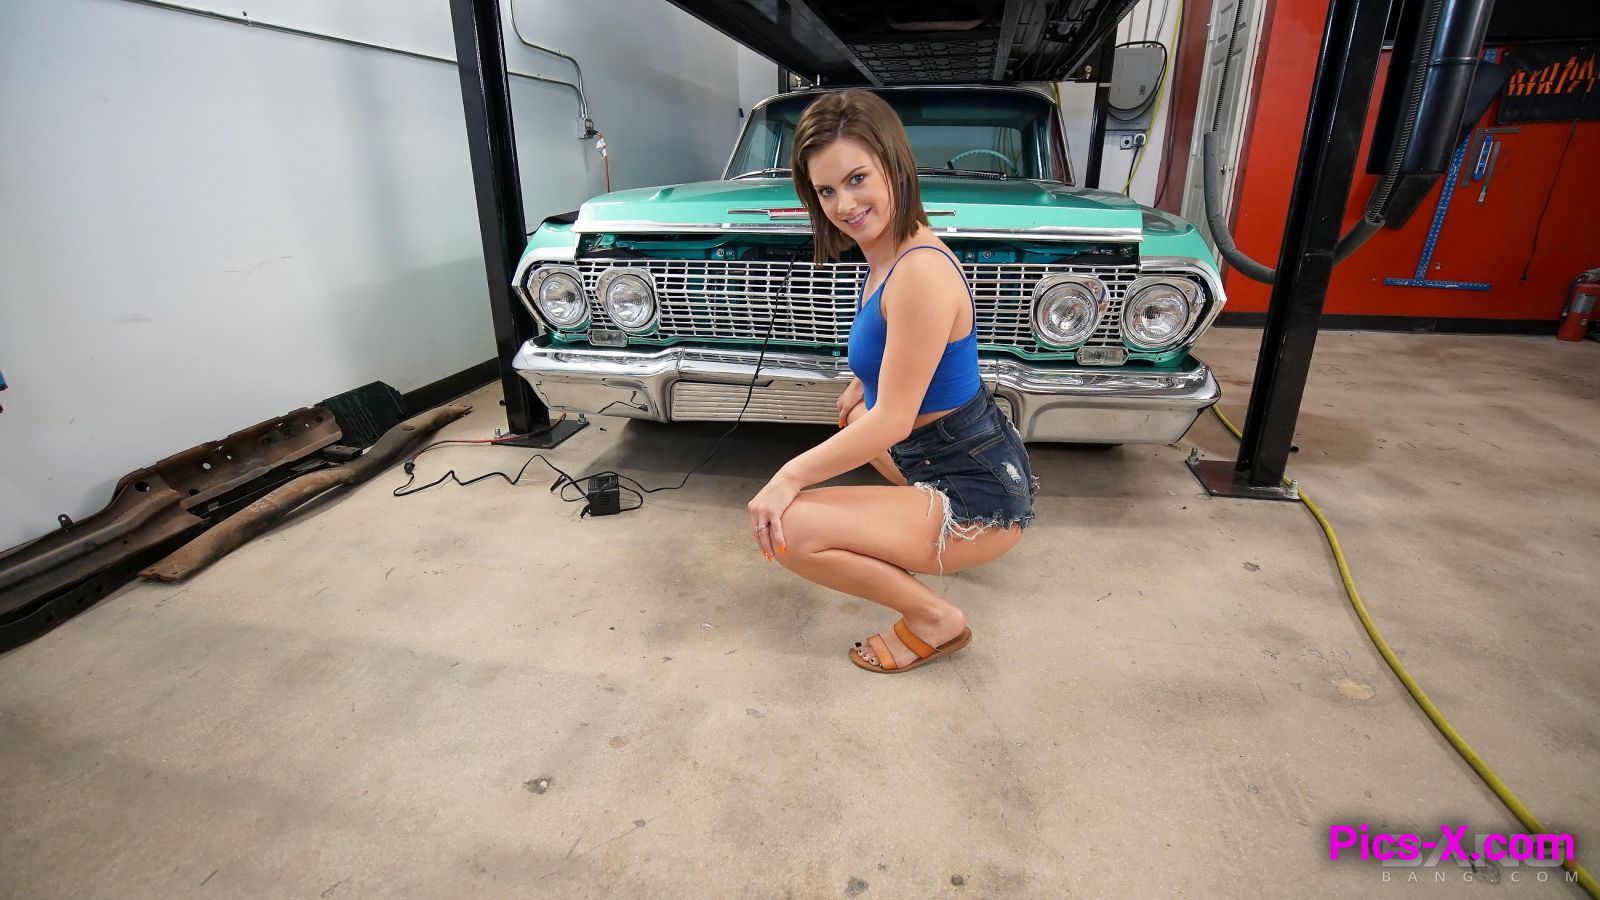 Rose Banks covers the bill with sex to get her mom's car fixed - Image 50